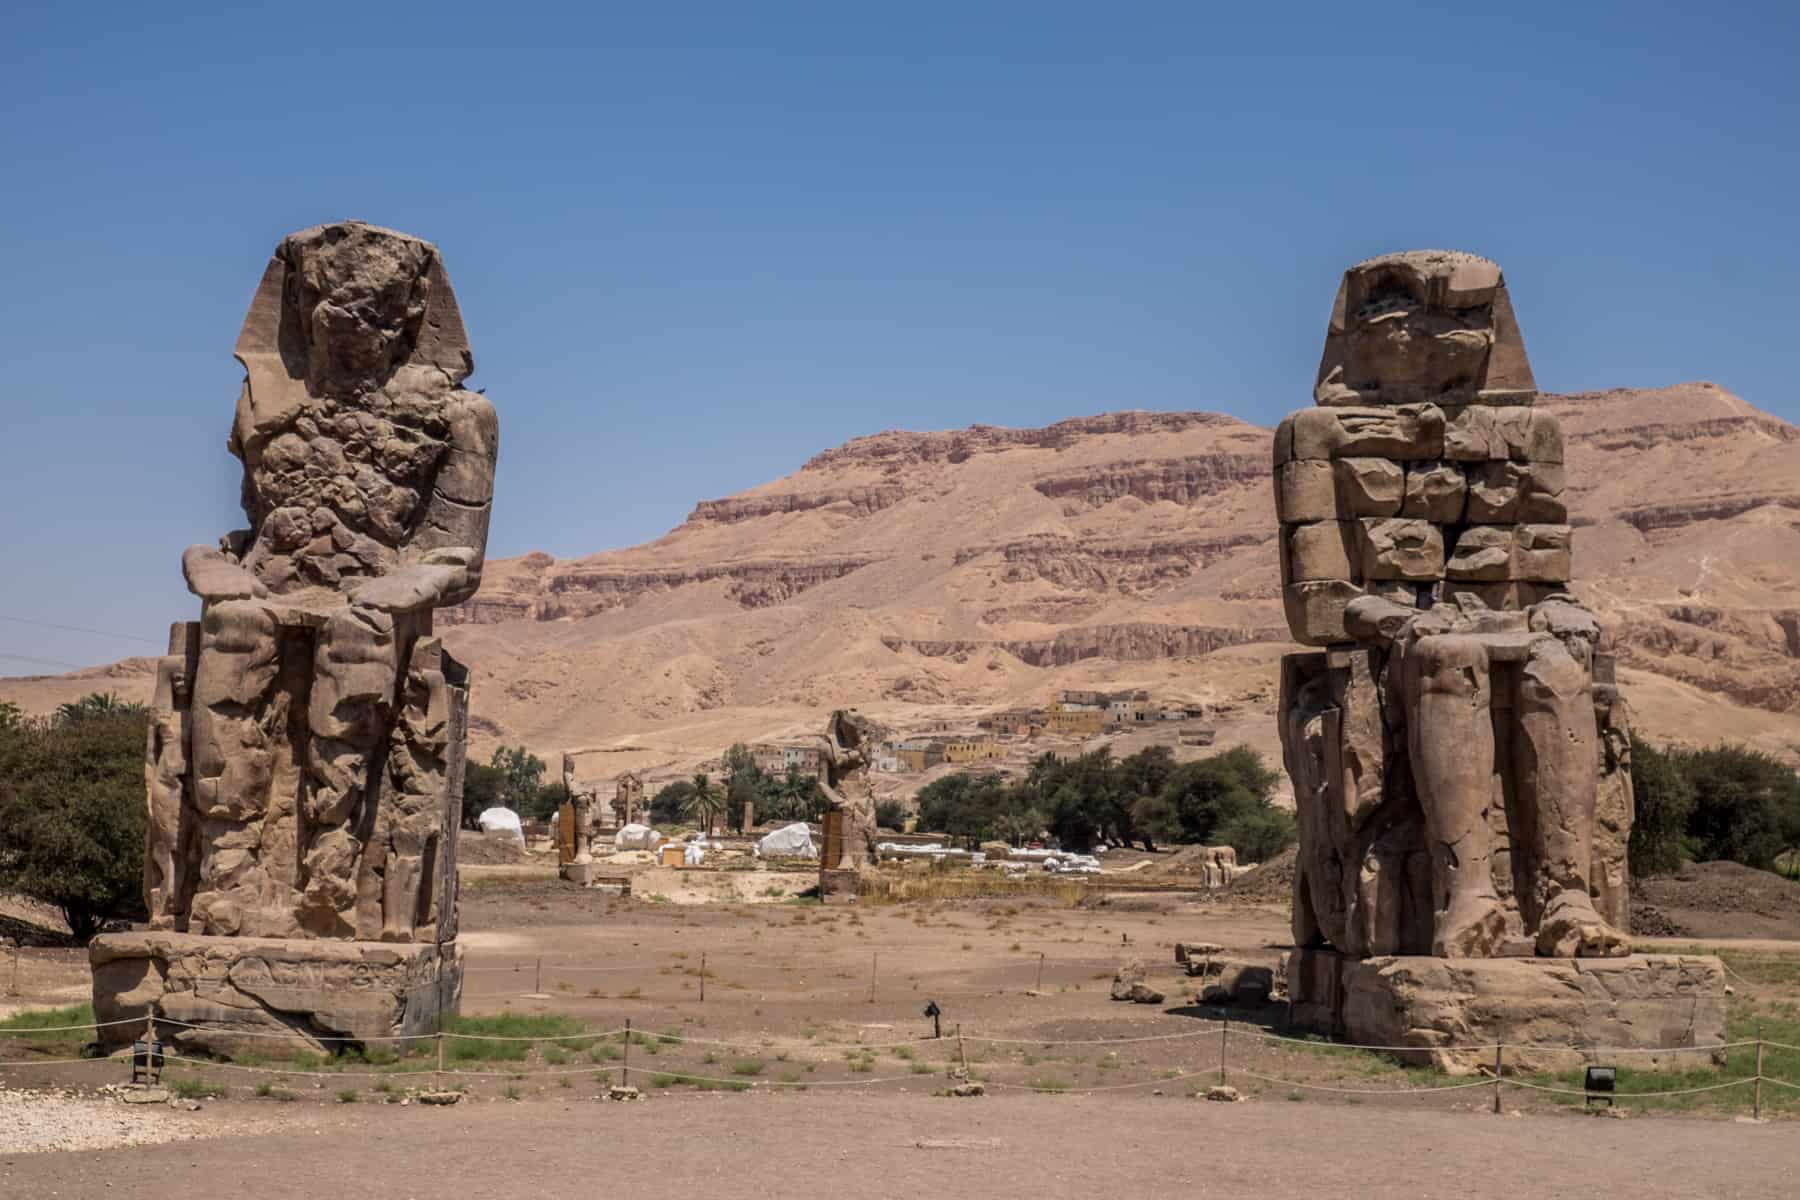 Three large statues of the Colossi of Memnon stand on a patch of grass in front of mountains in Luxor, Egypt